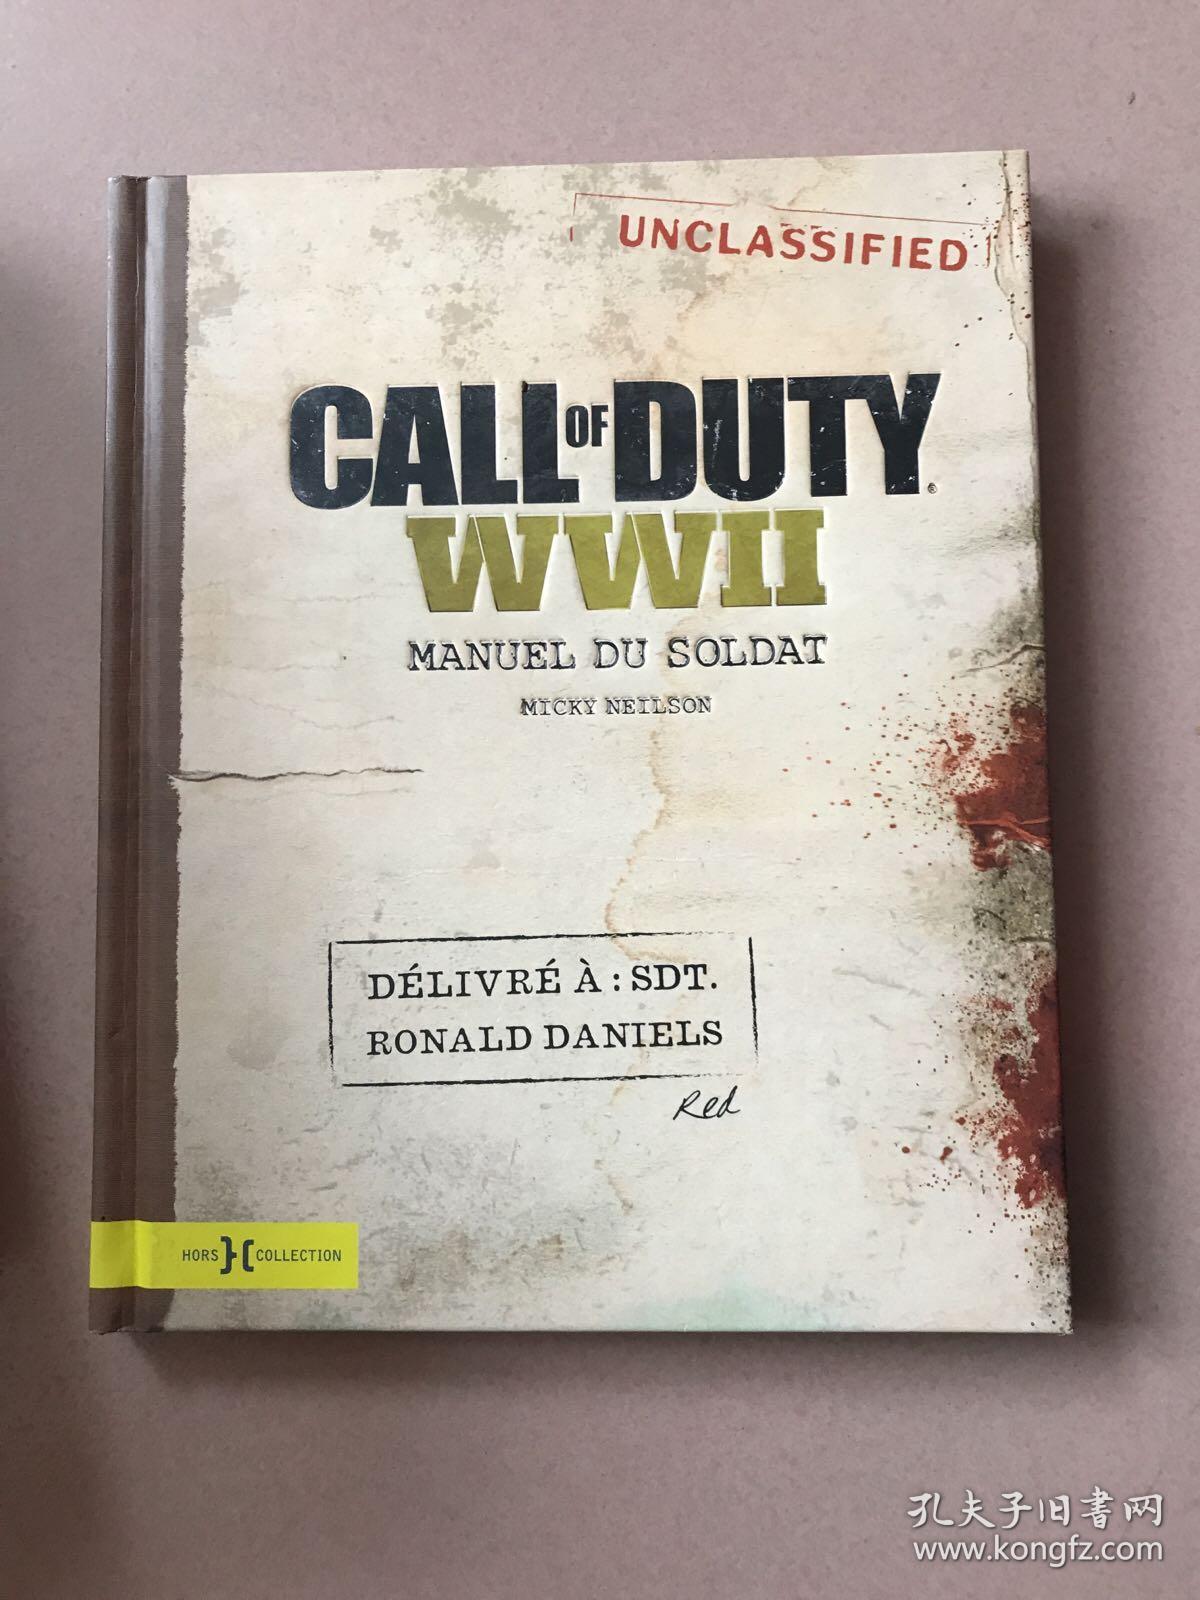 Call of Duty WWII: Field Manual